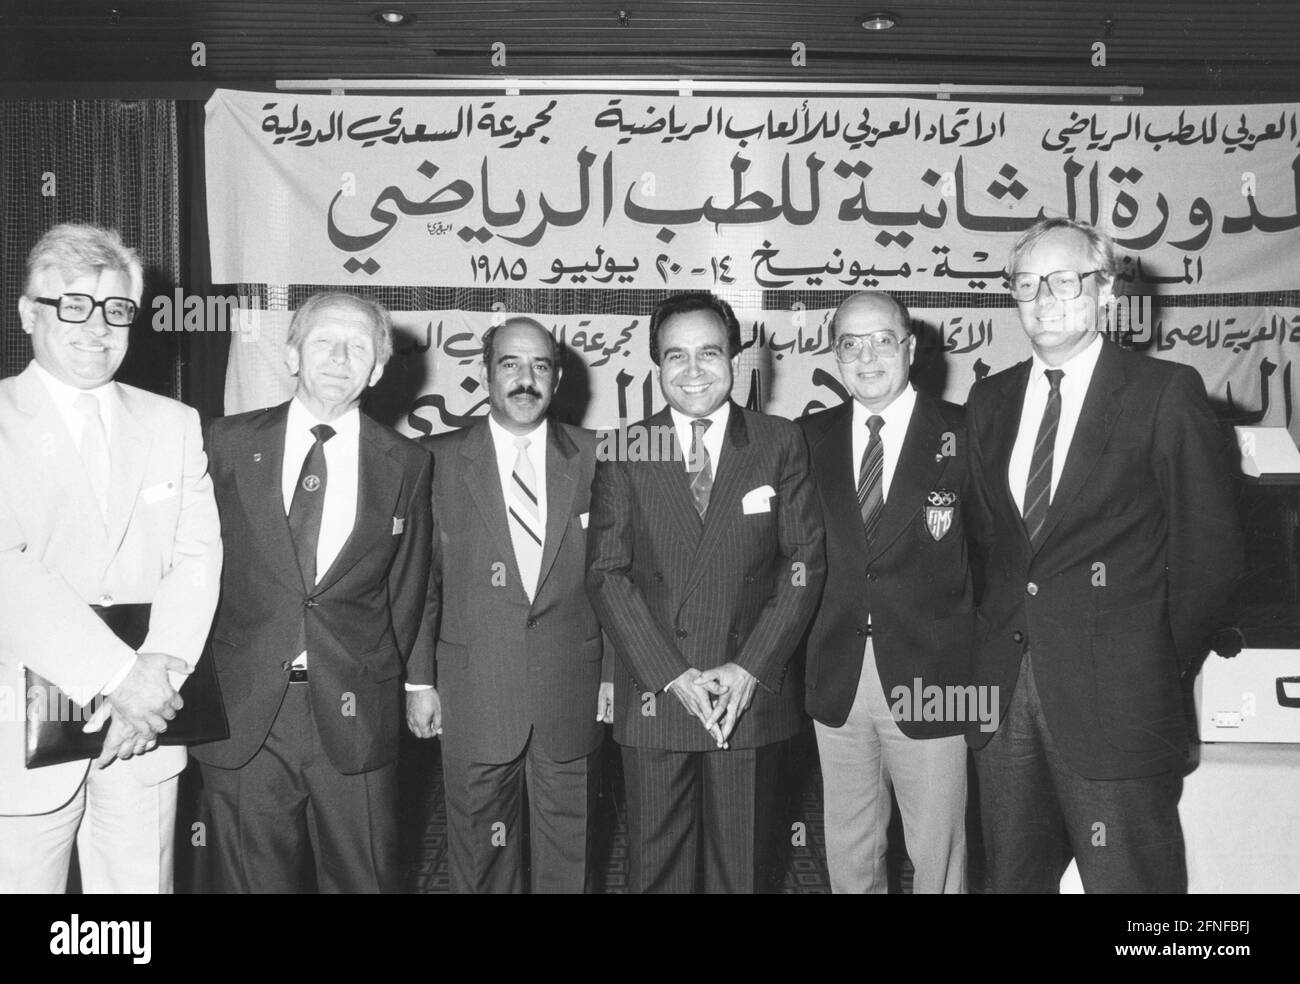 A symposium for Arab medical professionals and journalists is held at the Sheraton Hotel. From left to right: Diyad Hassa, President of the Arab Federation of Sports Journalists, Professor Einar Erikson, President of the International Federation of Sports Medicine, Othman Al-Saad, Secretary General of the Arab Federation of Sports and Youth, Mohammed Al-Sadi, graduate in business, Ali Buzayen, President of the Arab Federation of Sports Medicine and Franz Heigenhauser from the Bavarian Ministry of Social Affairs. [automated translation] Stock Photo